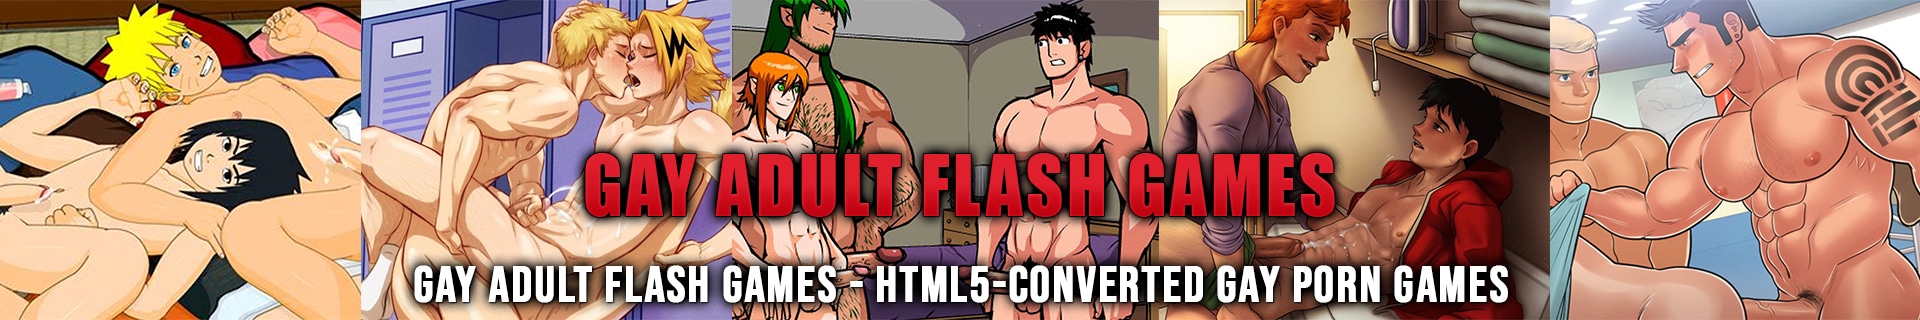 The flash gay porn Best bible for beginners adults